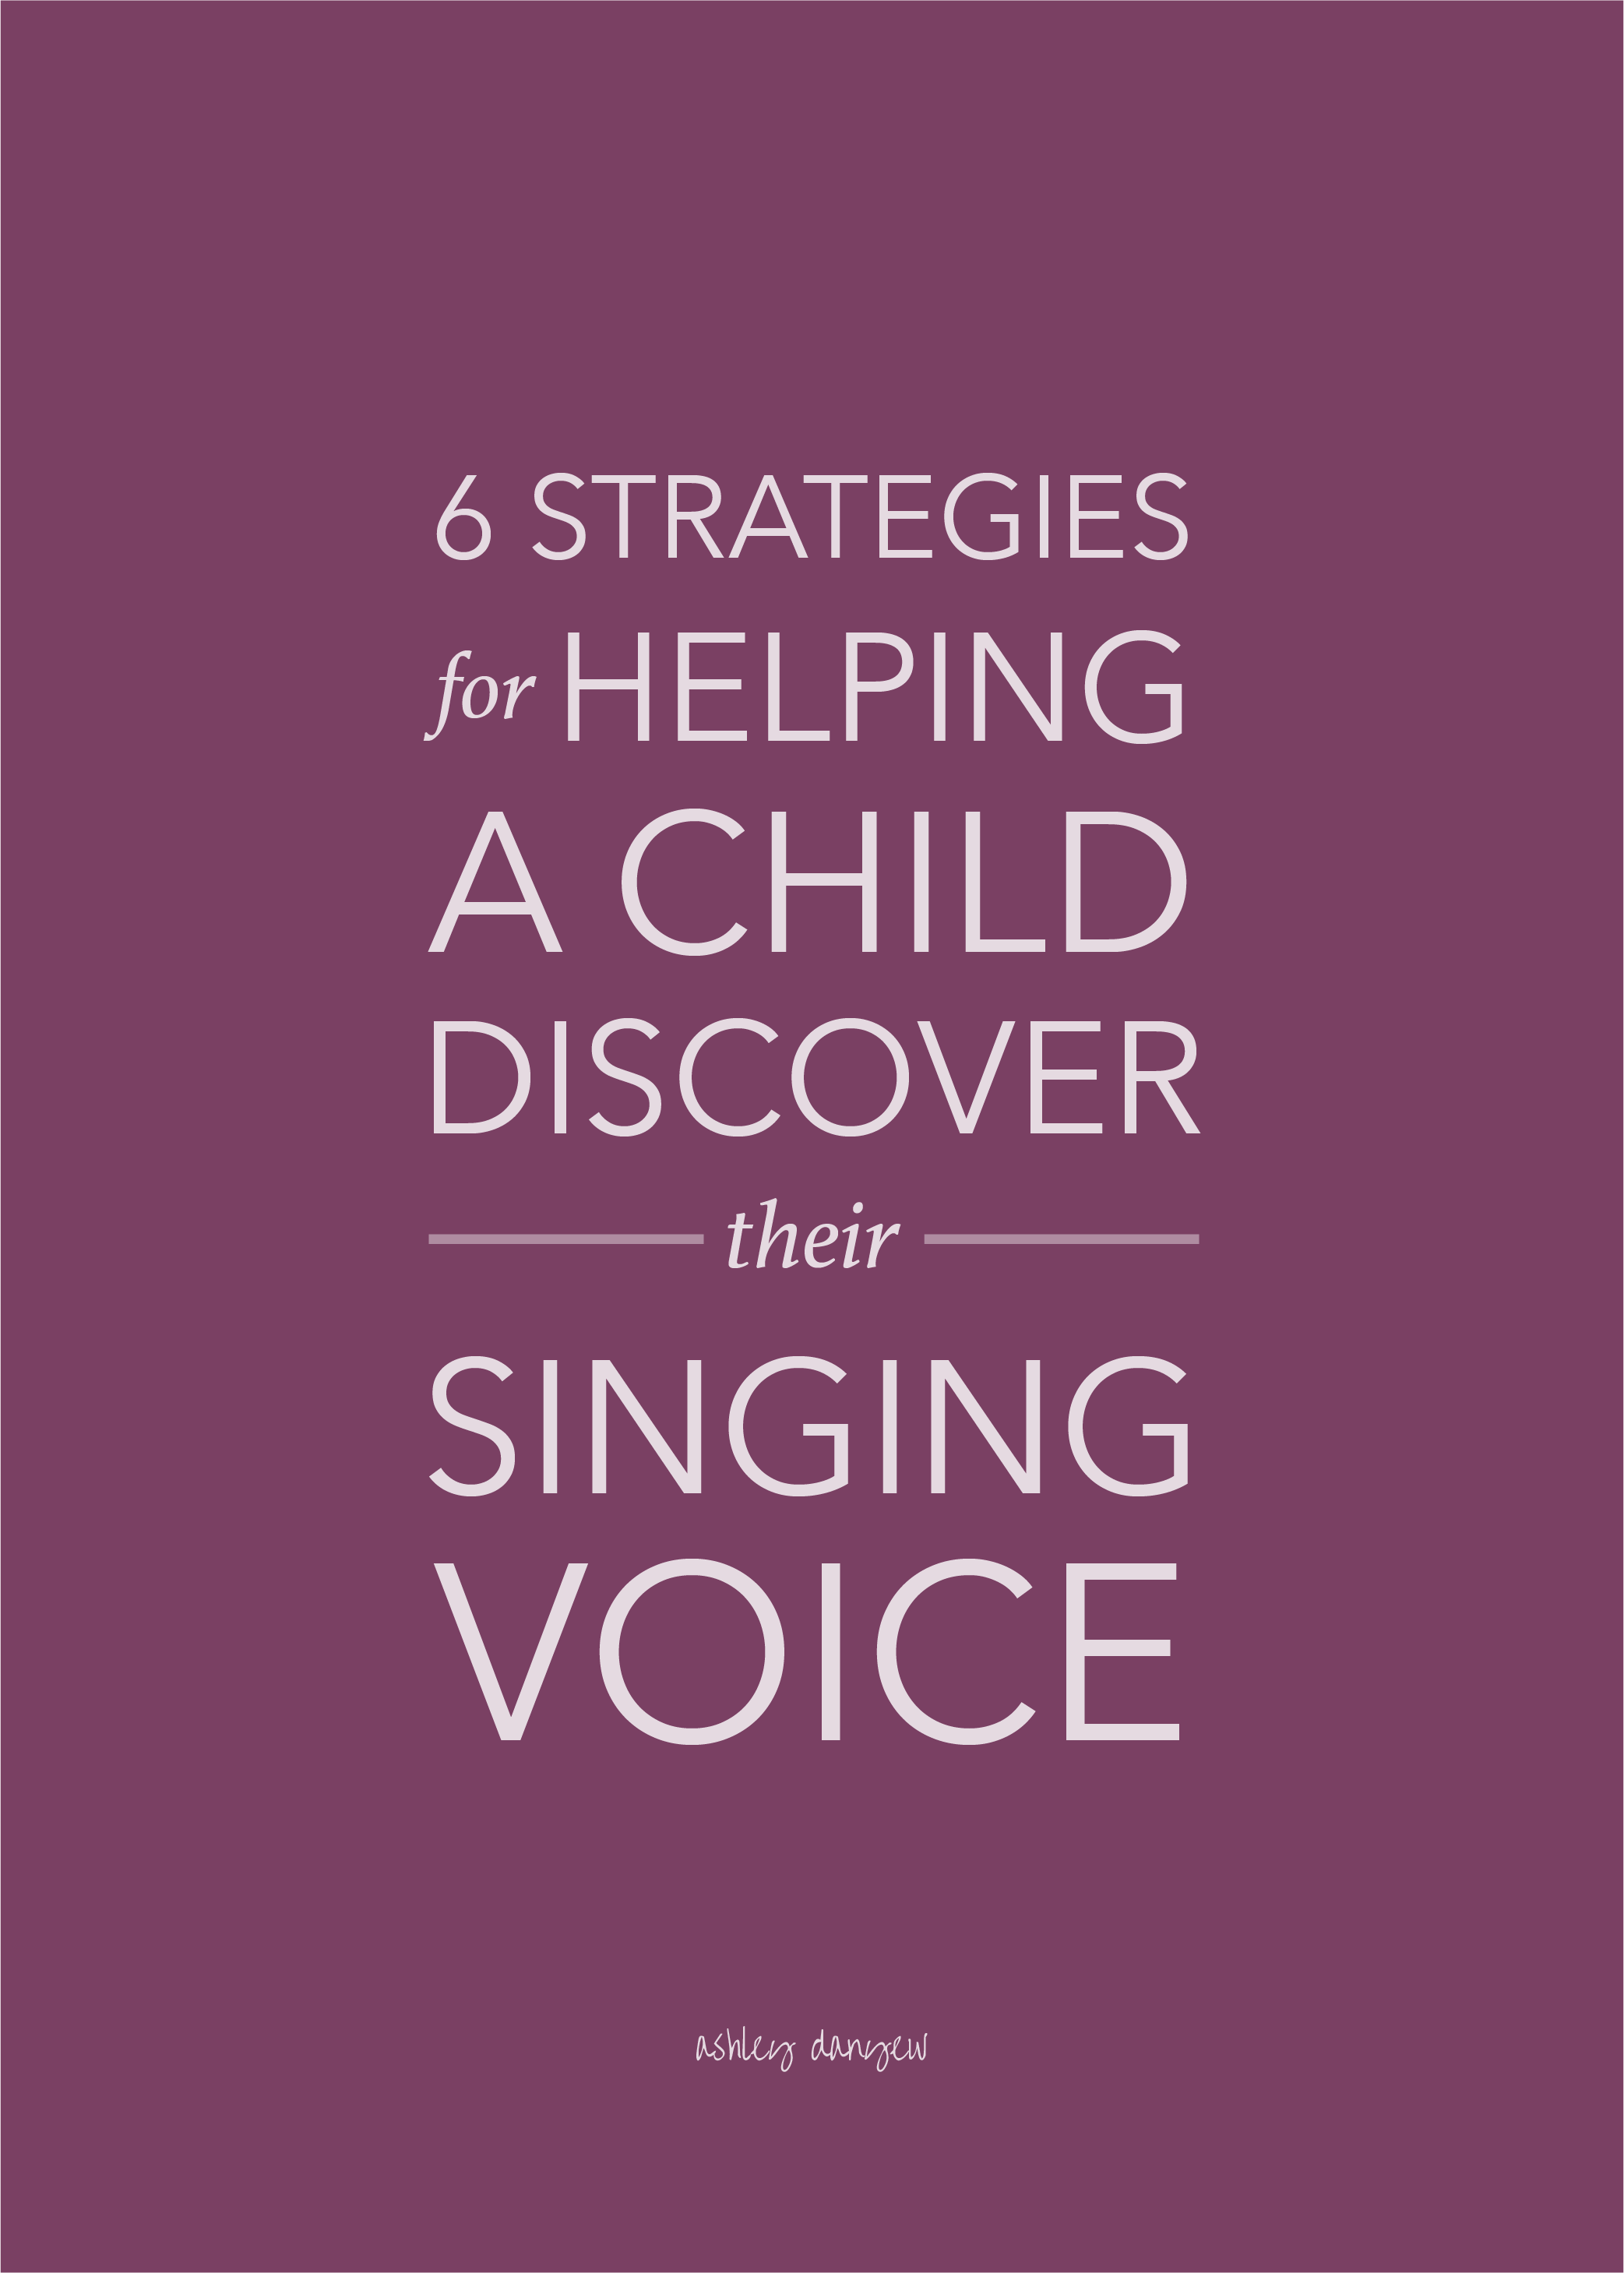 How to Teach Children to Sing: 14 Steps (with Pictures) - wikiHow